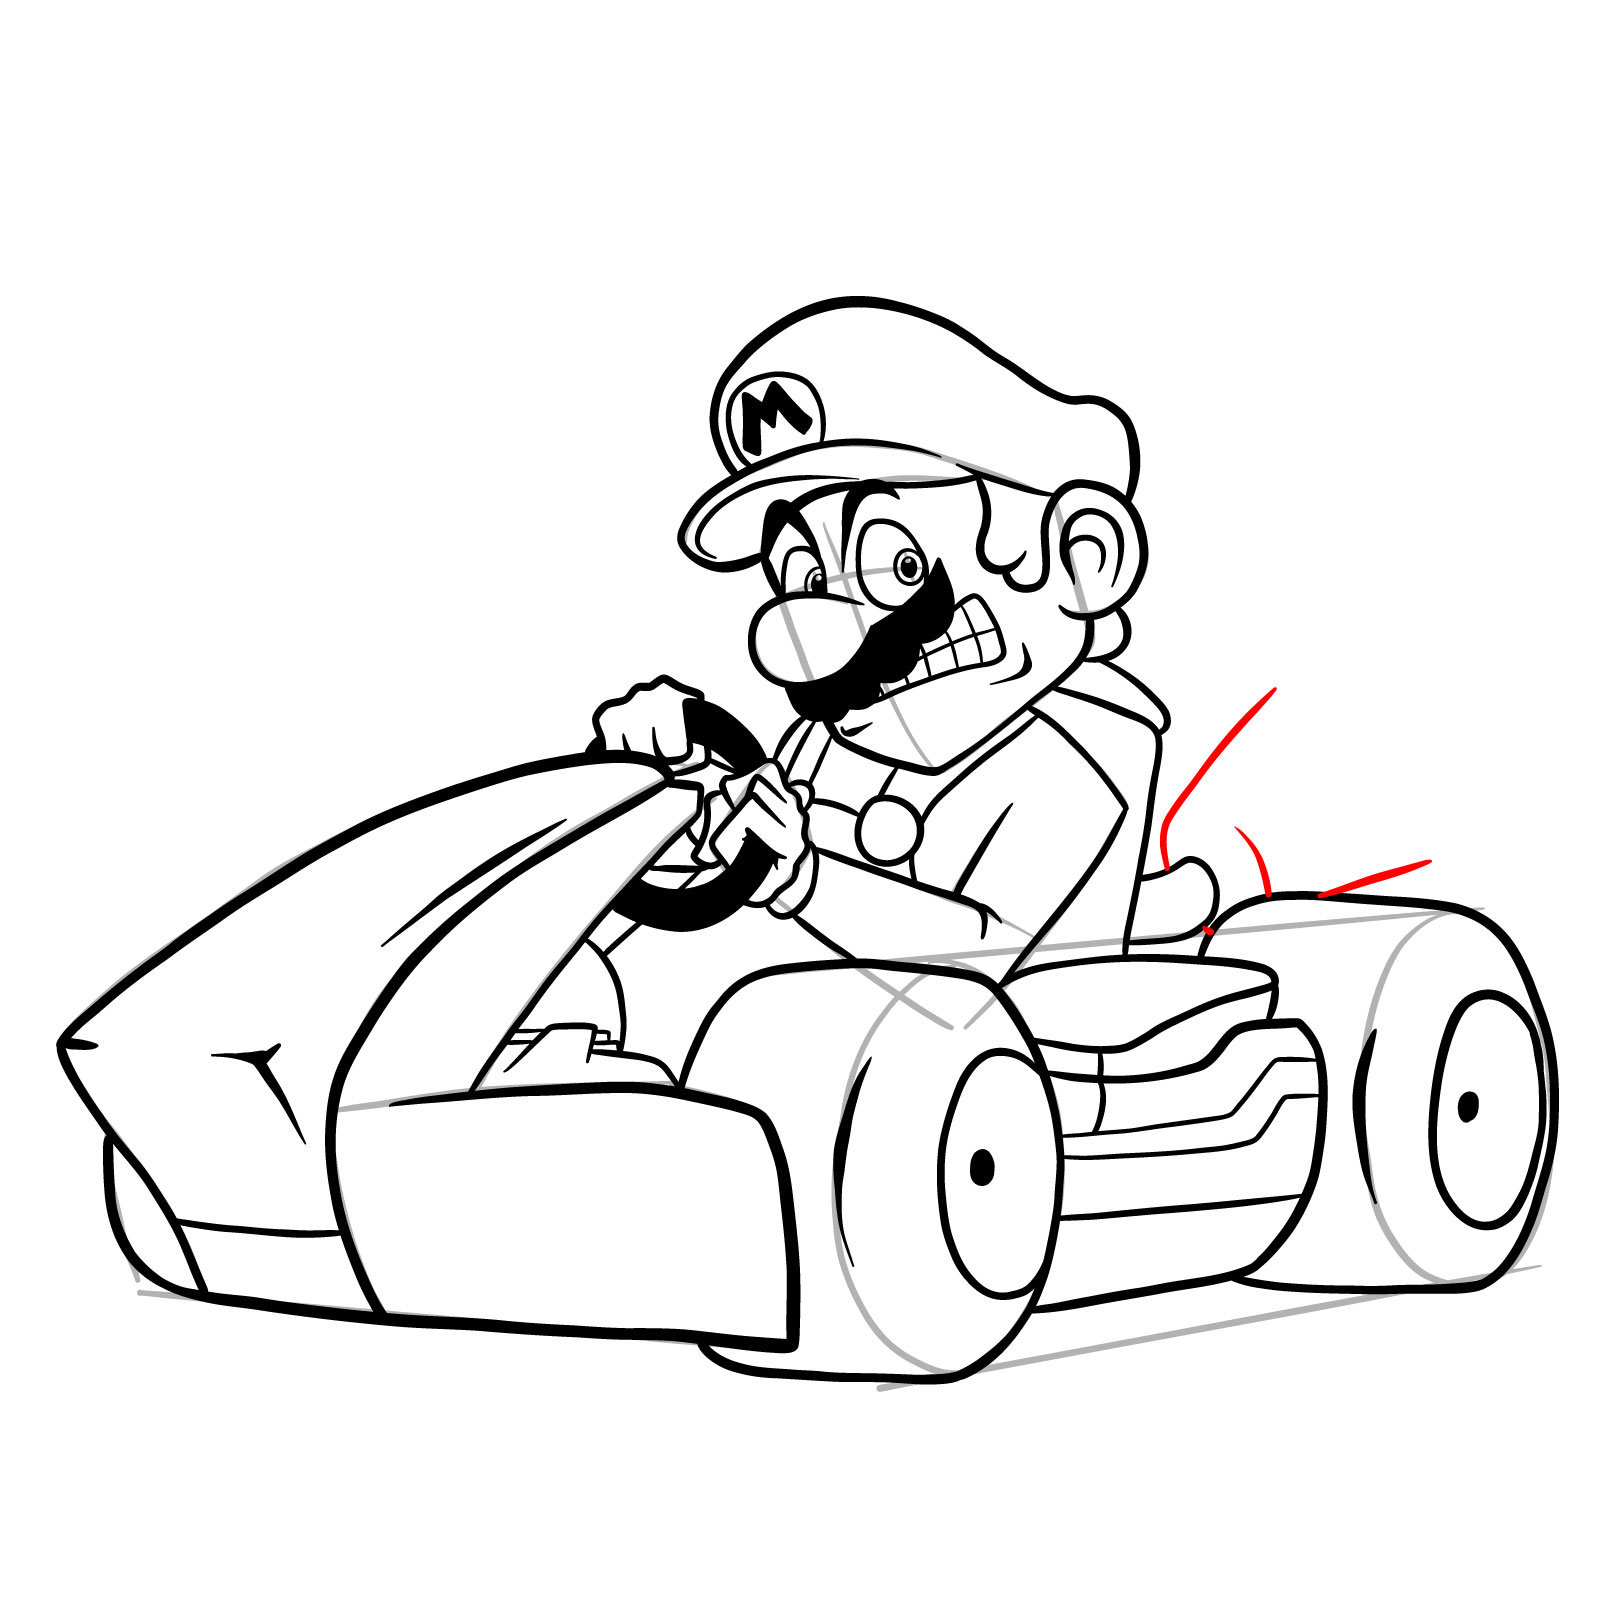 How to draw Race Traitors Mario - step 42